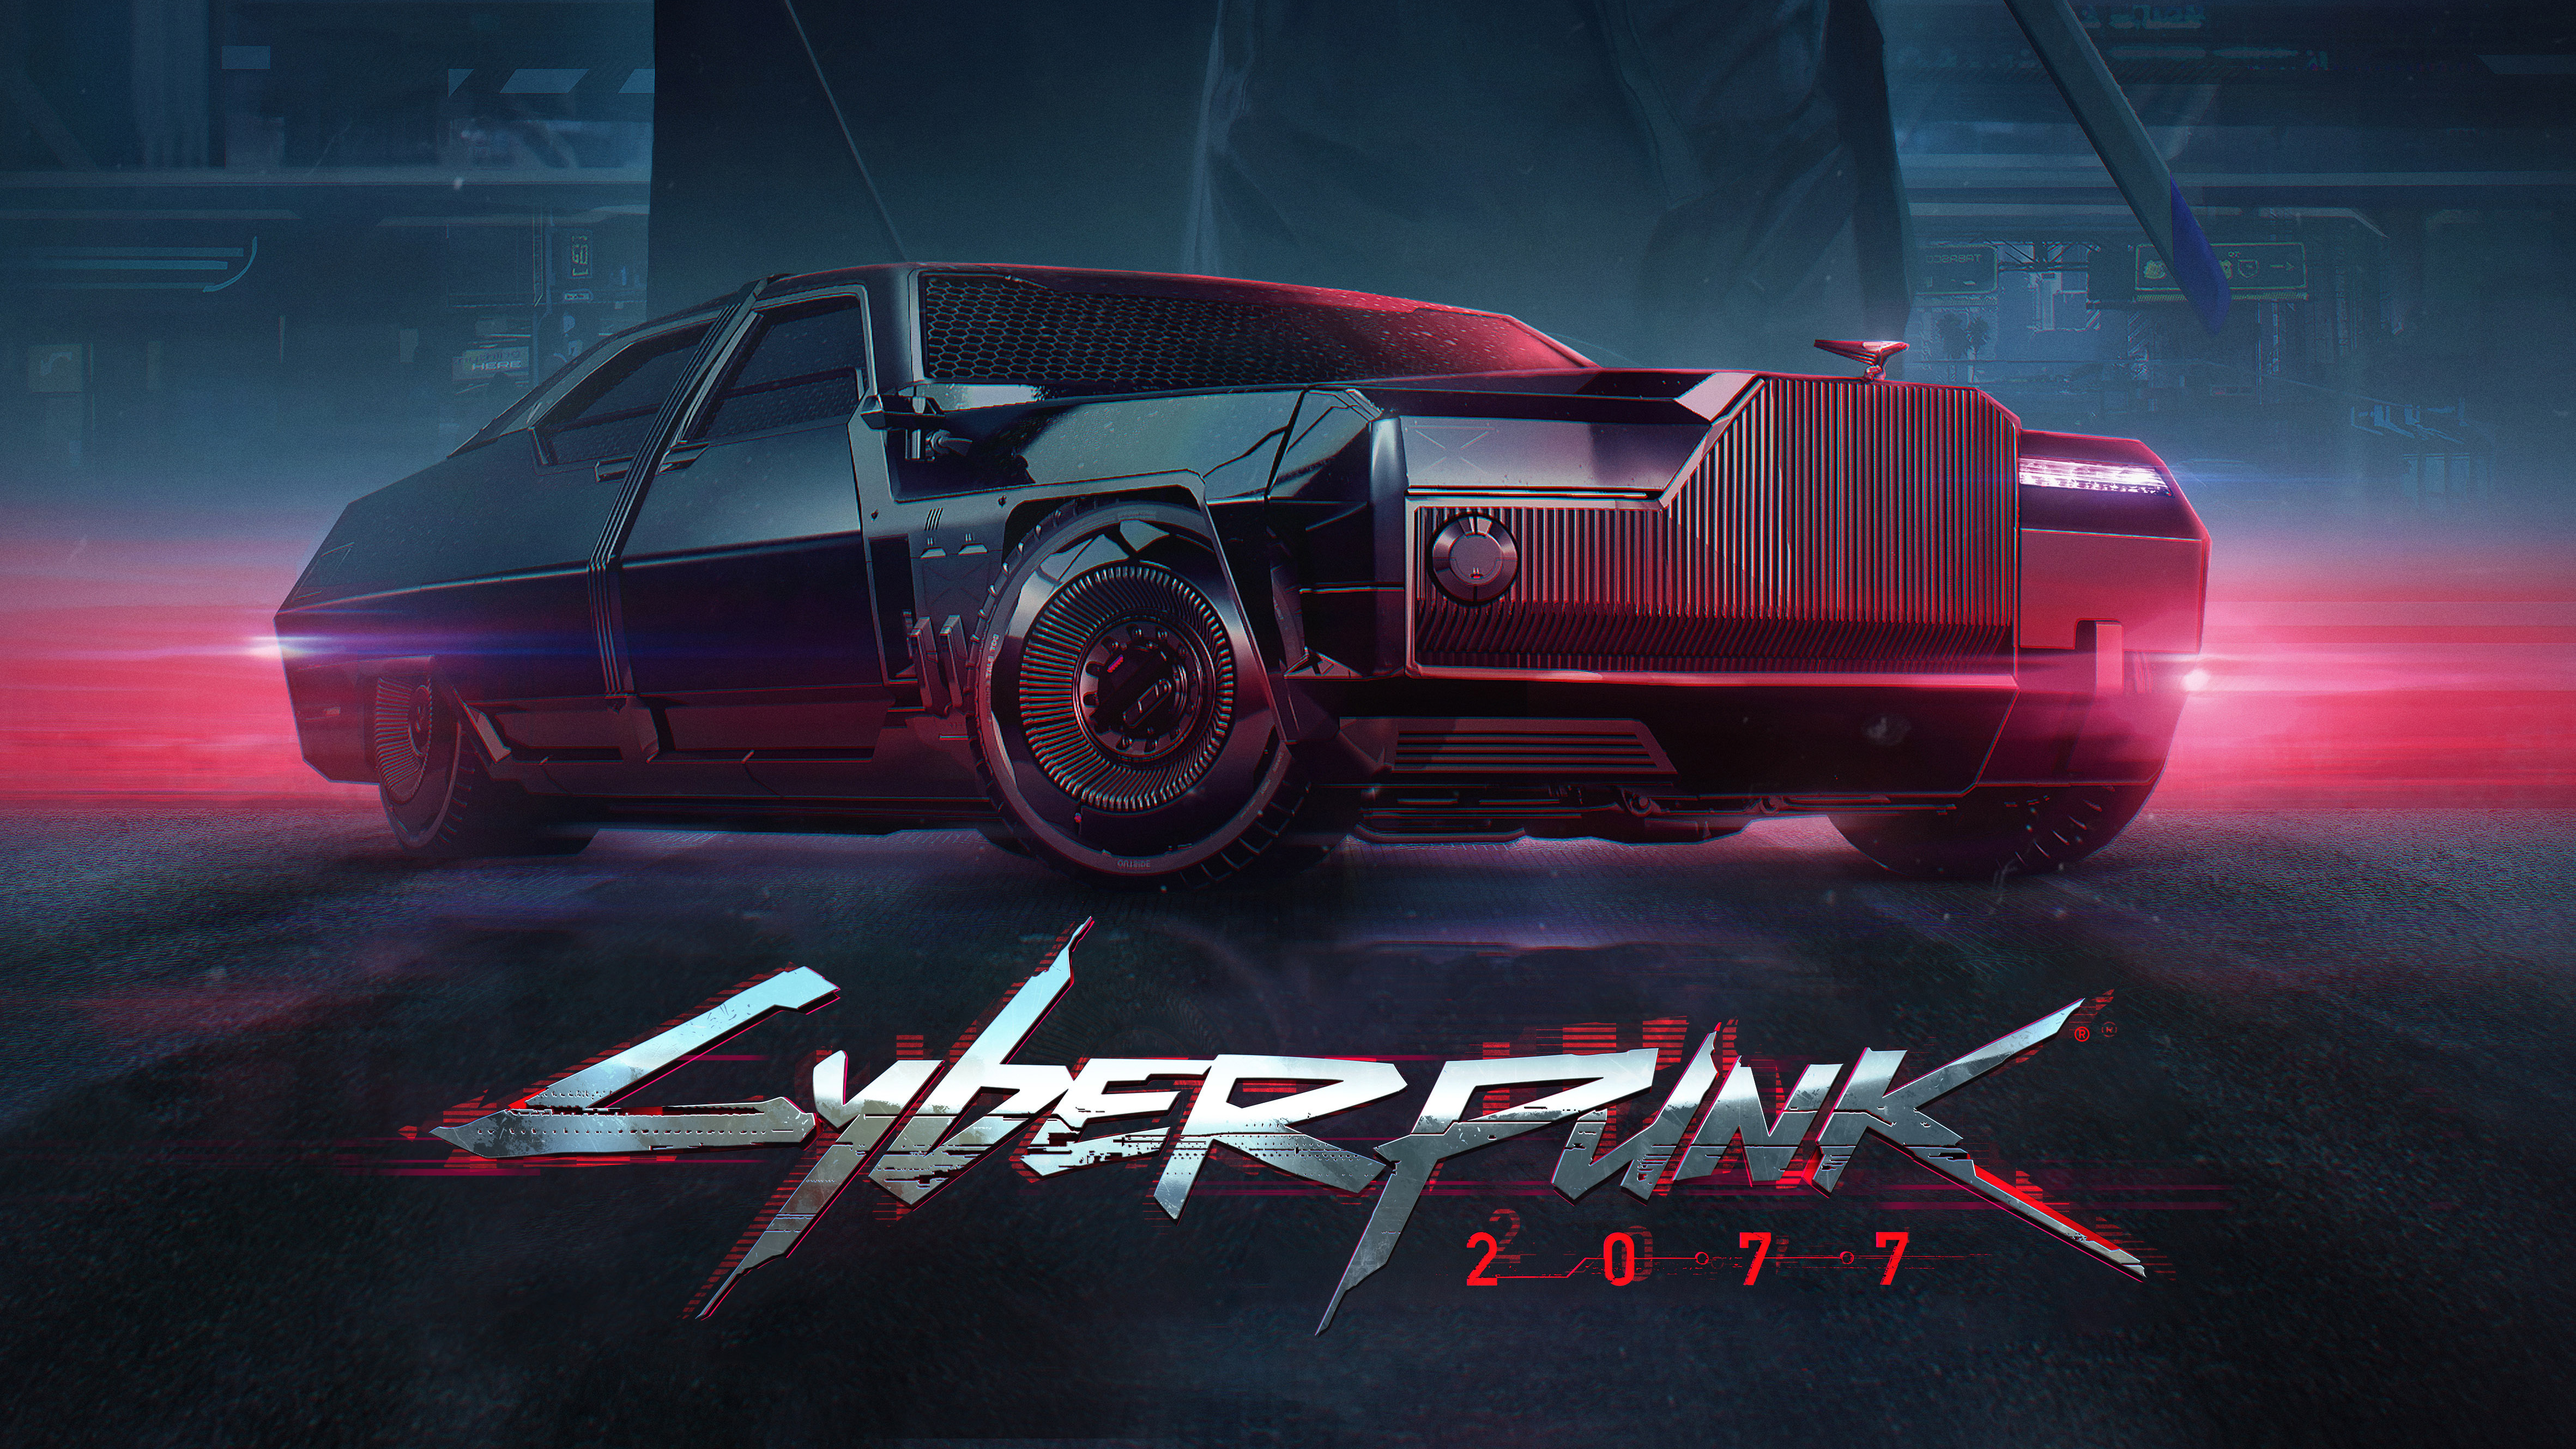 Cyberpunk 2077 Poster 4k, HD Games, 4k Wallpapers, Images, Backgrounds